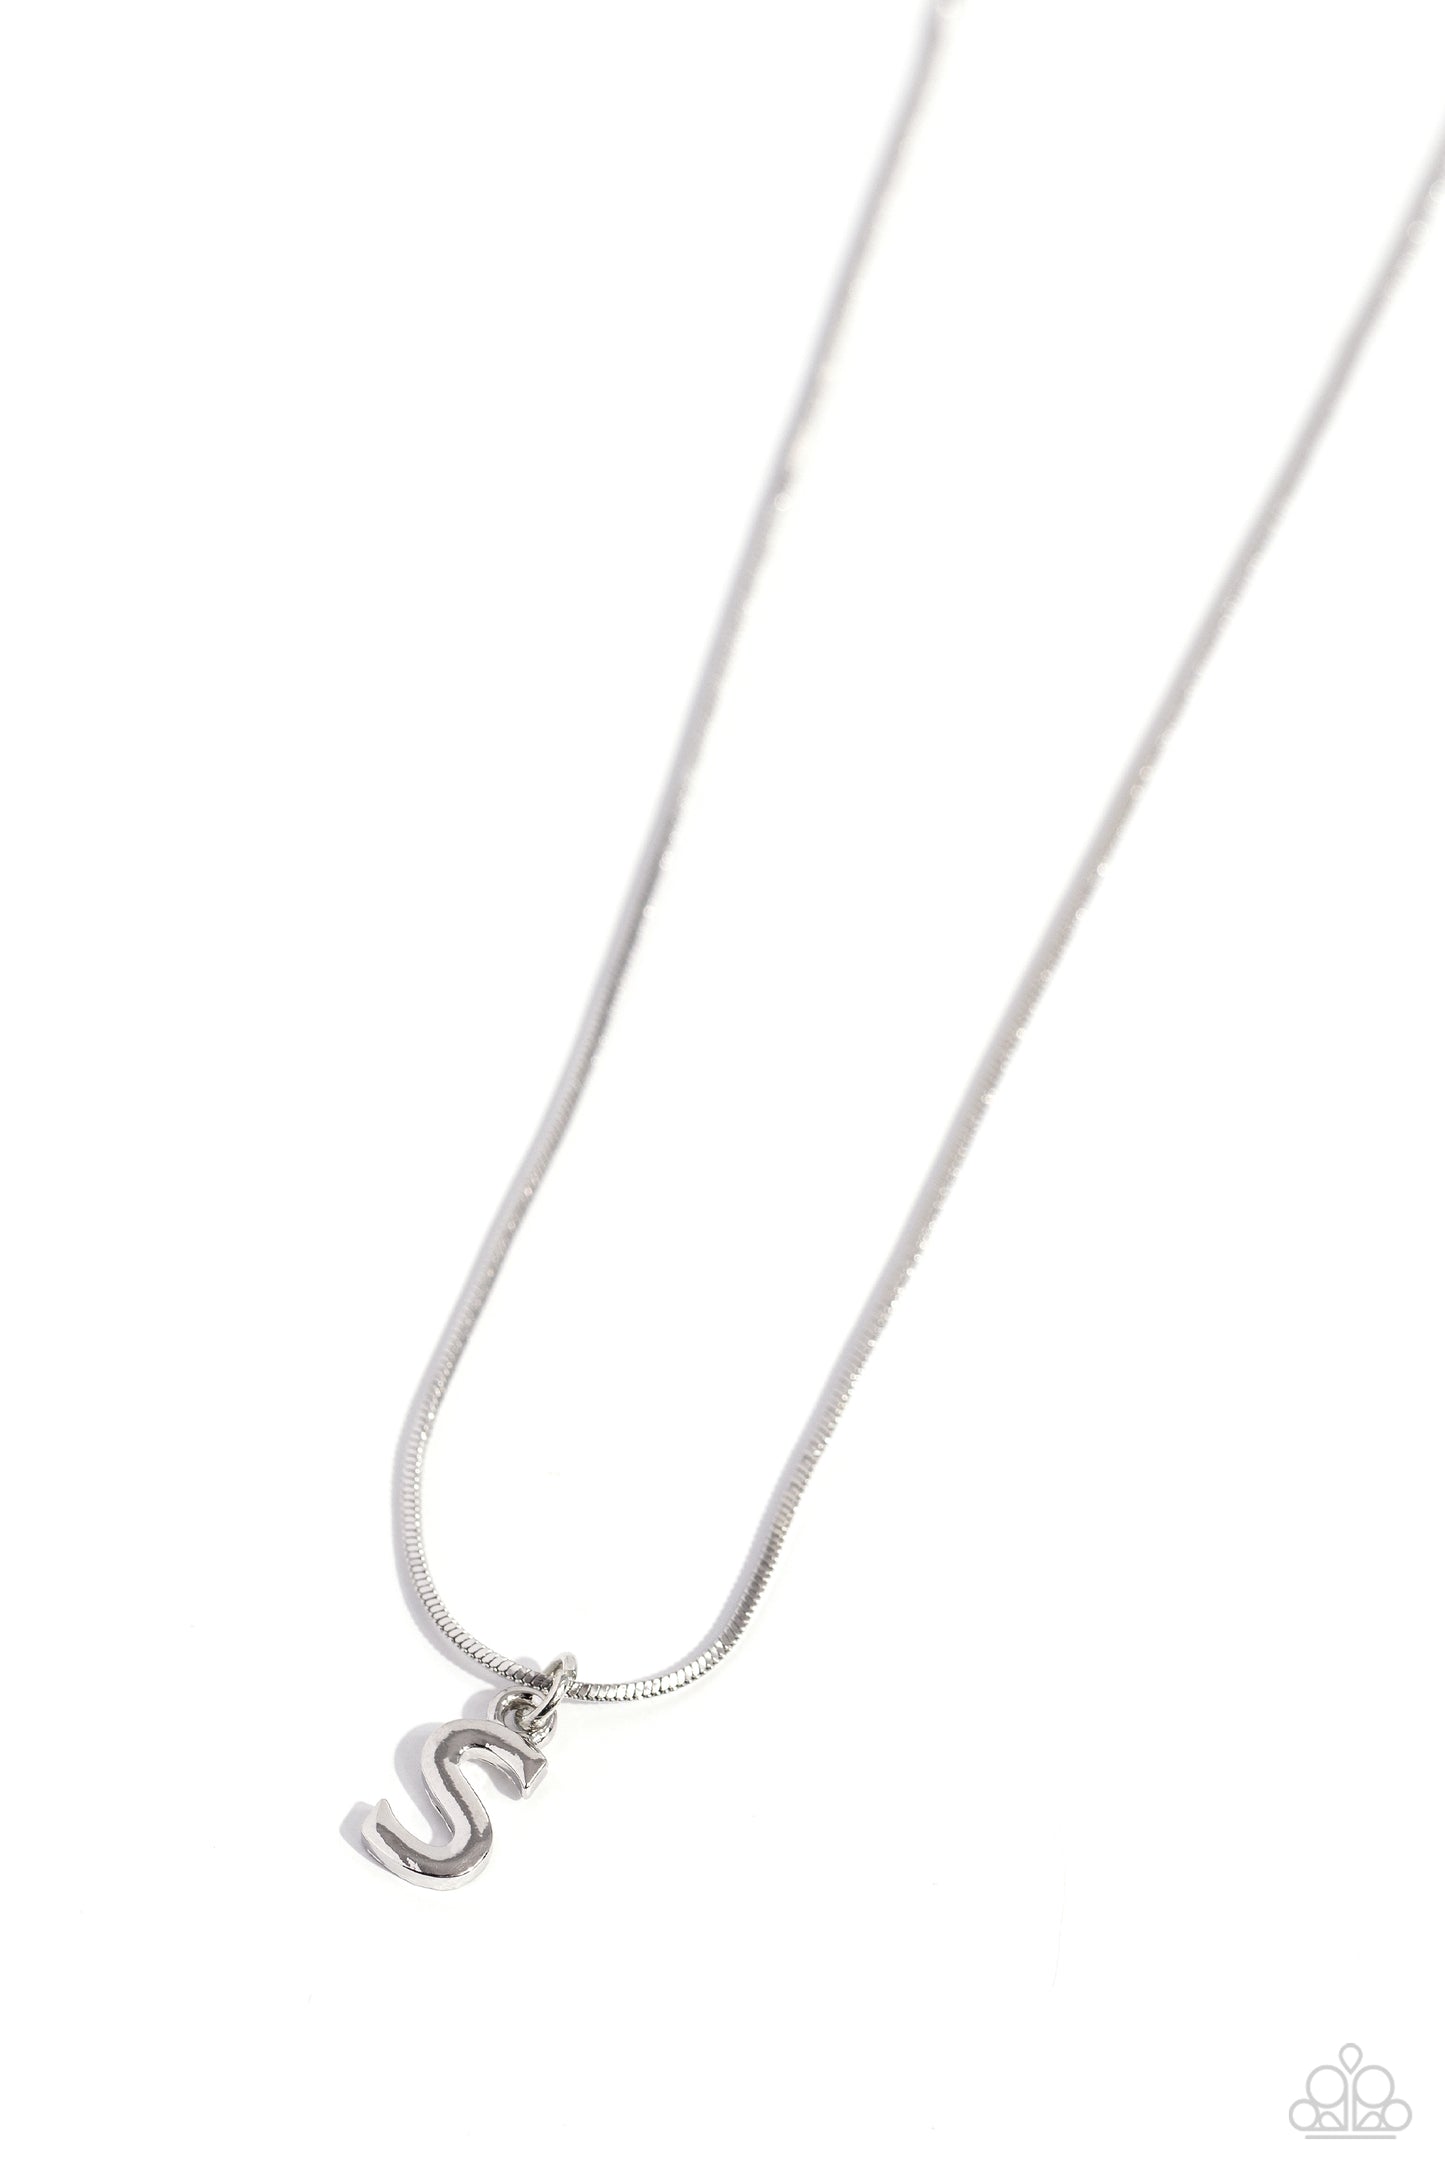 Seize the Initial Paparazzi Accessories Necklaces with Earrings Silver - S